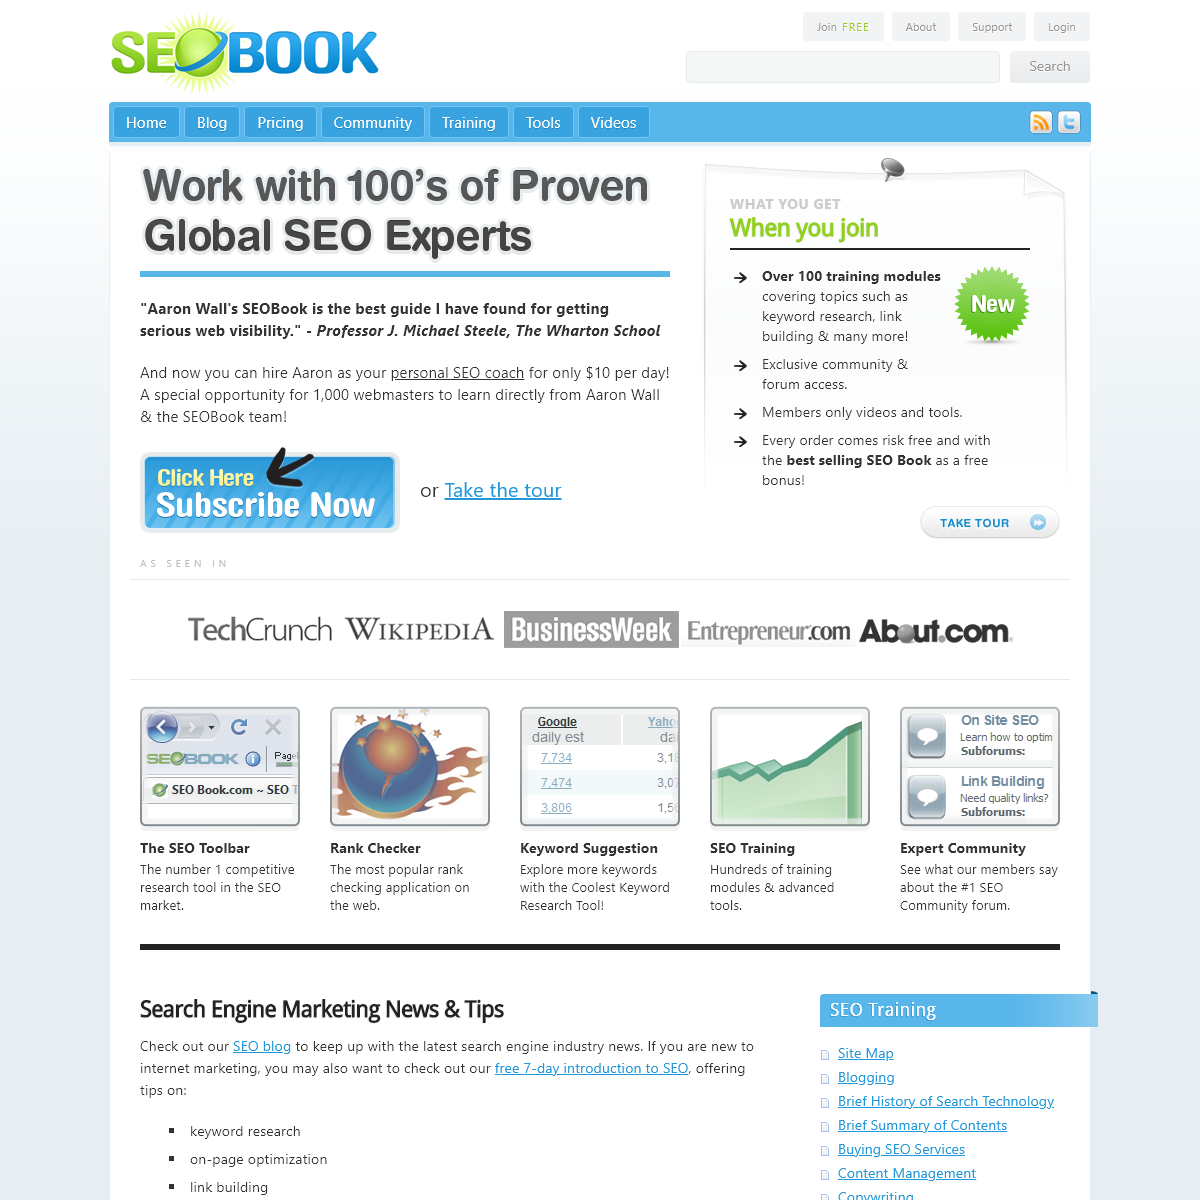 A complete backup of http://www.seobook.com/